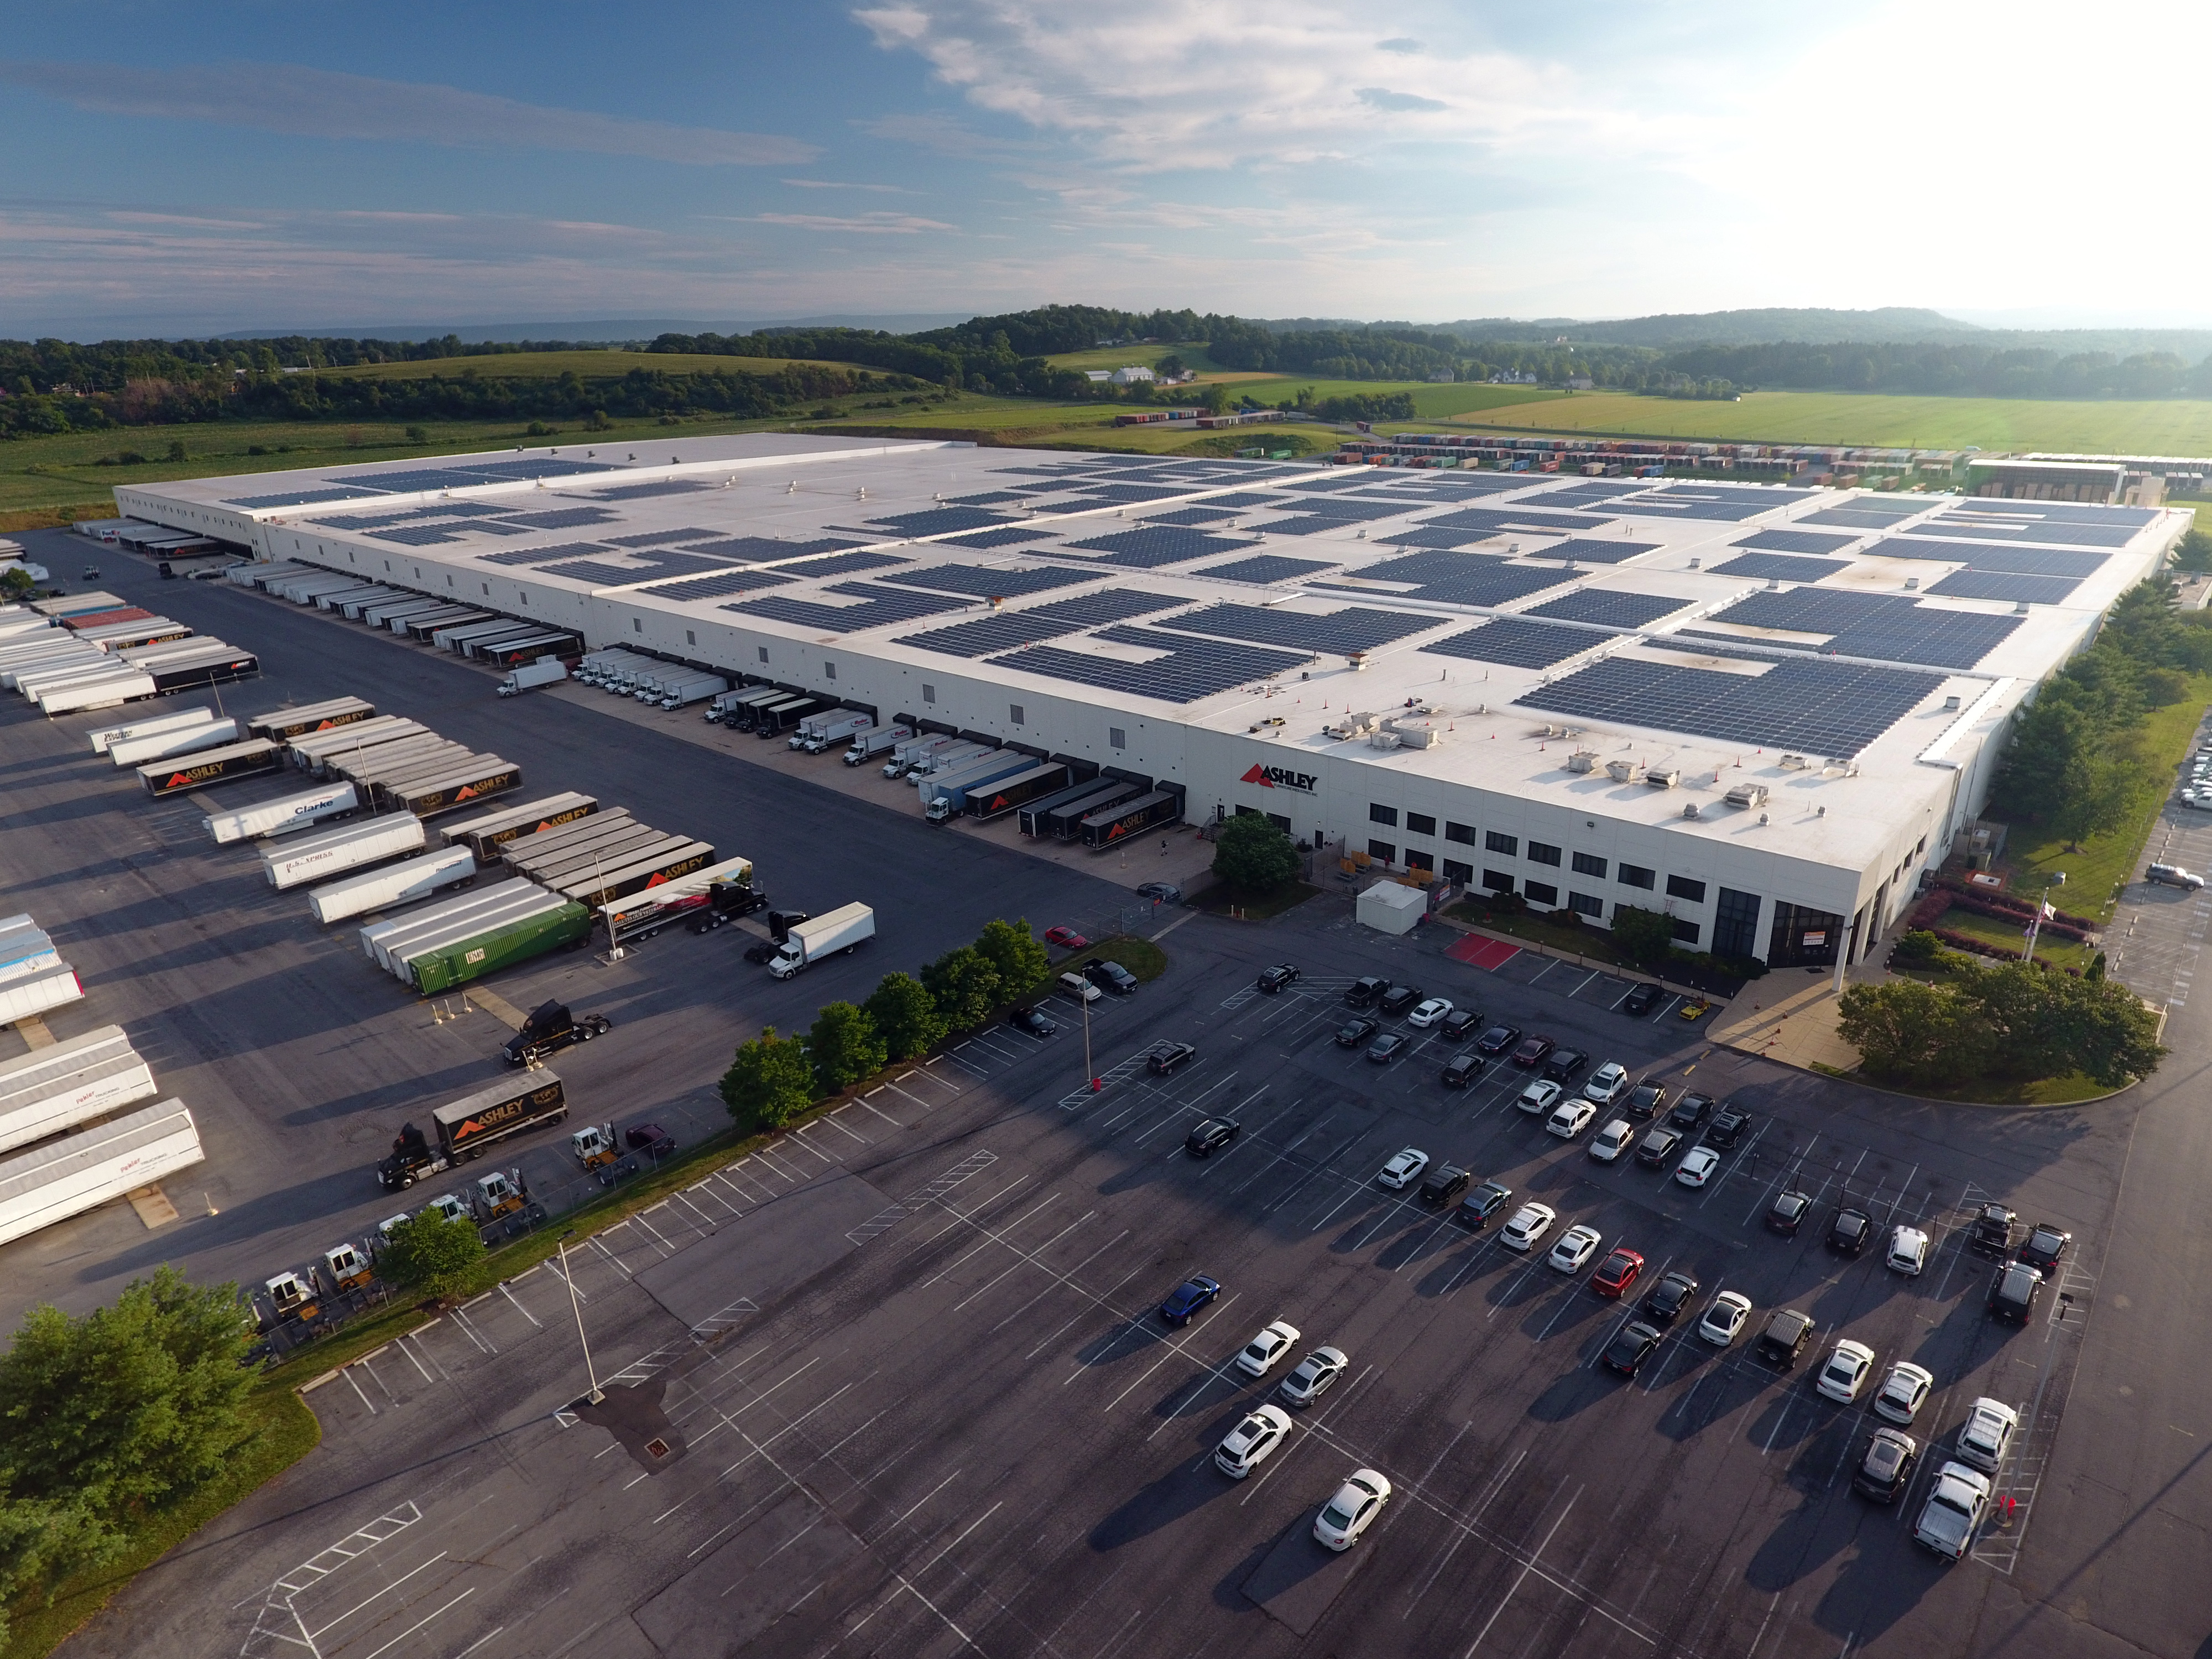 Rooftop solar panels help power Ashley Furniture DC in PA